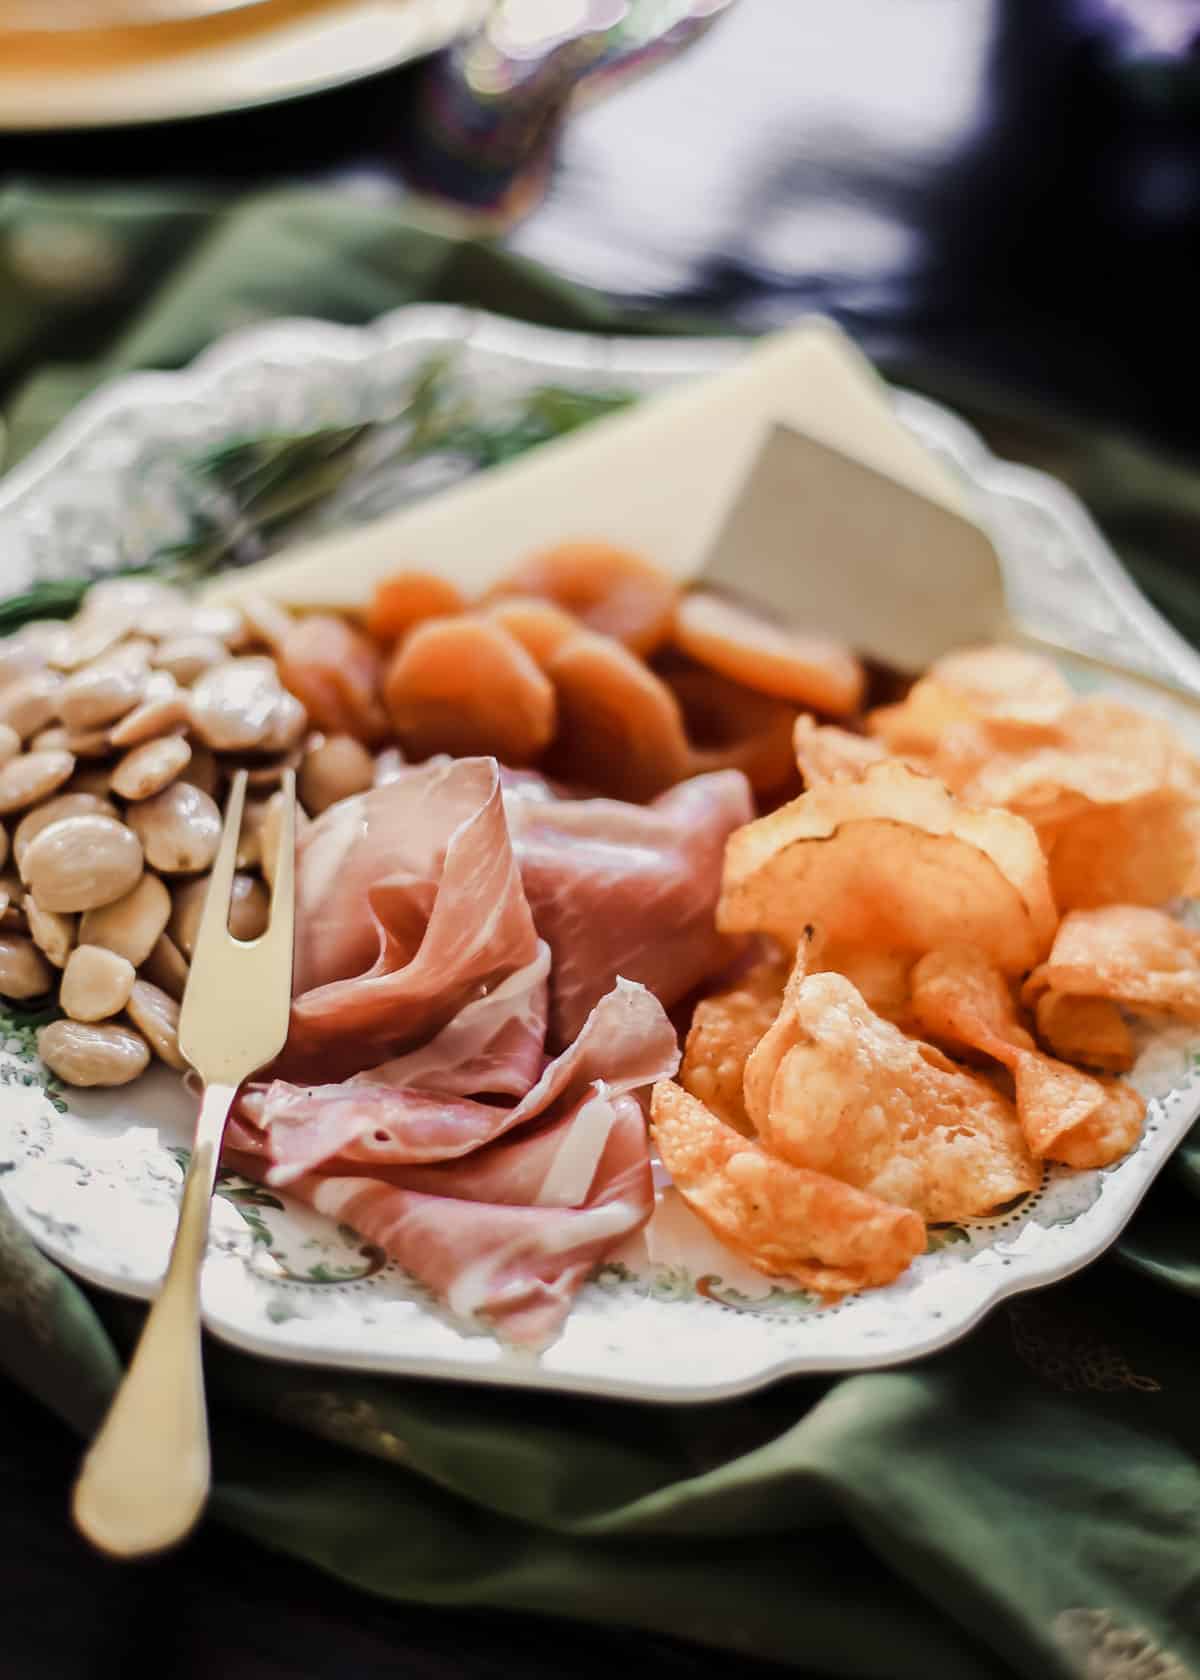 small plate filled with almonds, prosciutto, cheese, dried apricots and potato chips.